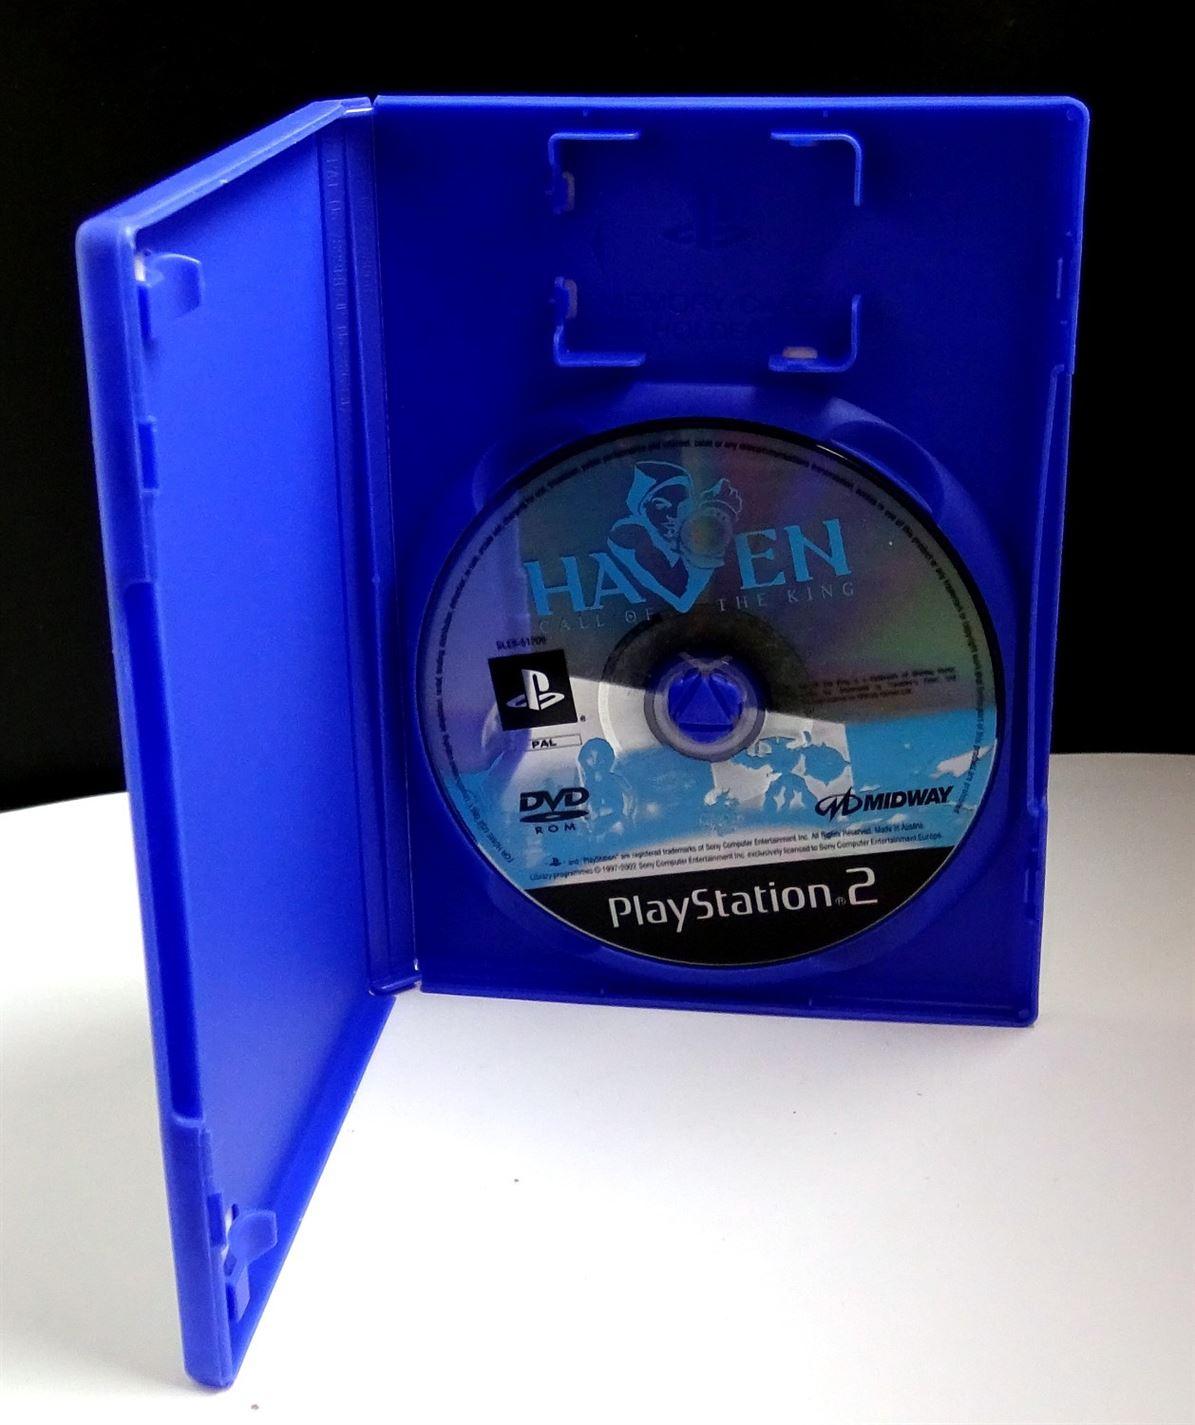 Haven: Call Of The King PS2 (Playstation 2) - UK Seller